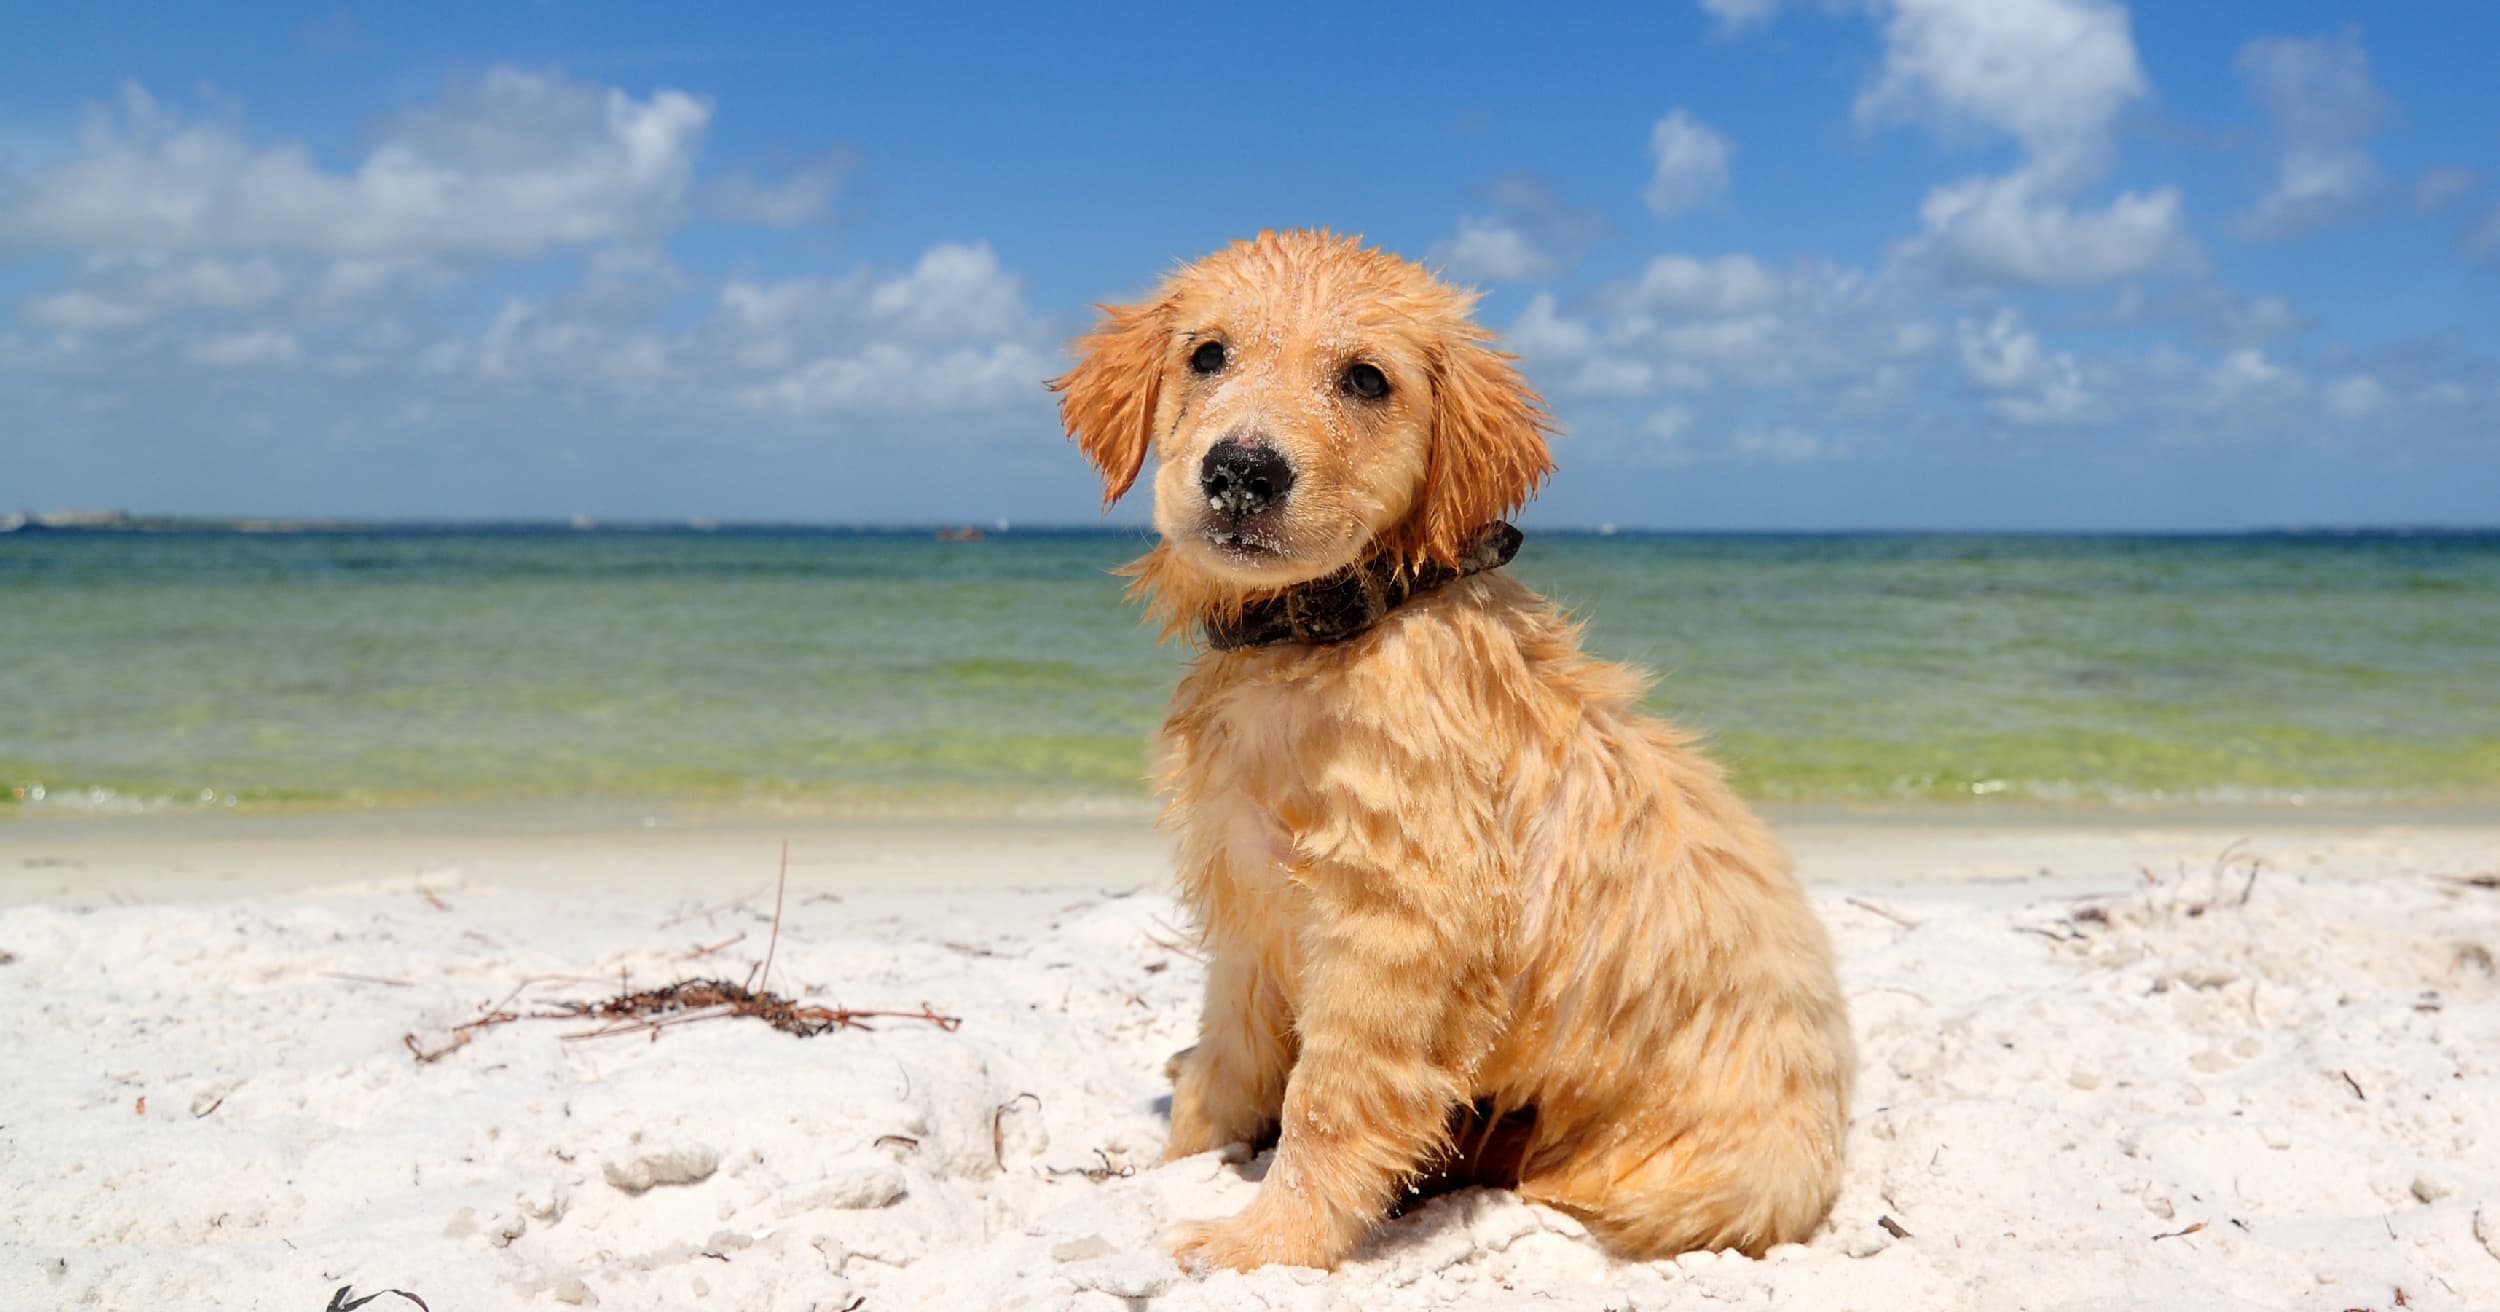 A wet puppy sitting in the sand at the beach.